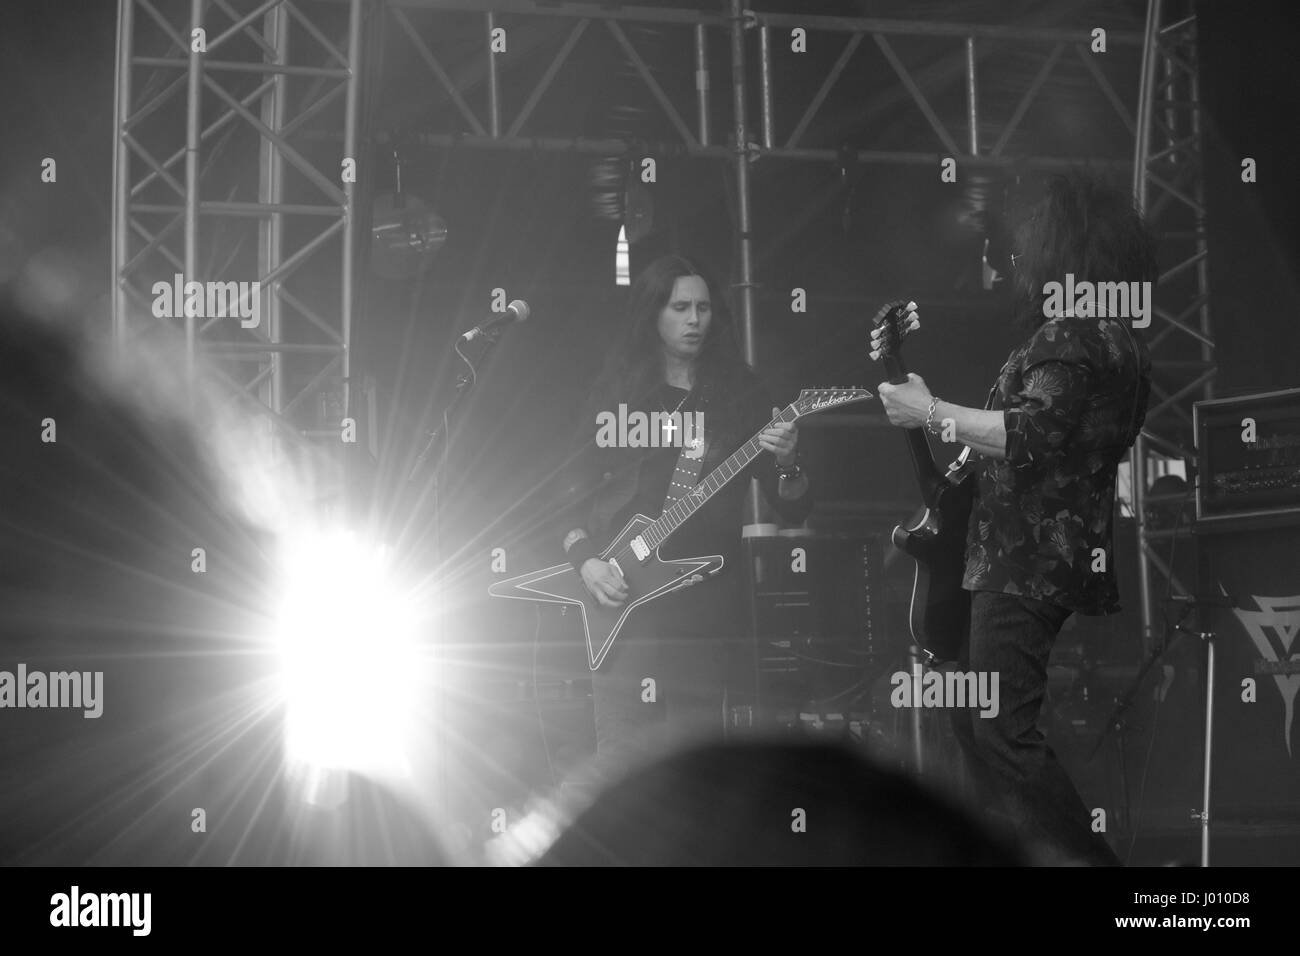 Frankfurt, Germany. 8th April 2017. Steve Stevens performing with Gus G. and Franky Perez on the Center Stage at Musikmesse in Frankfurt, Germany Credit: Markus Wissmann/Alamy Live News Stock Photo